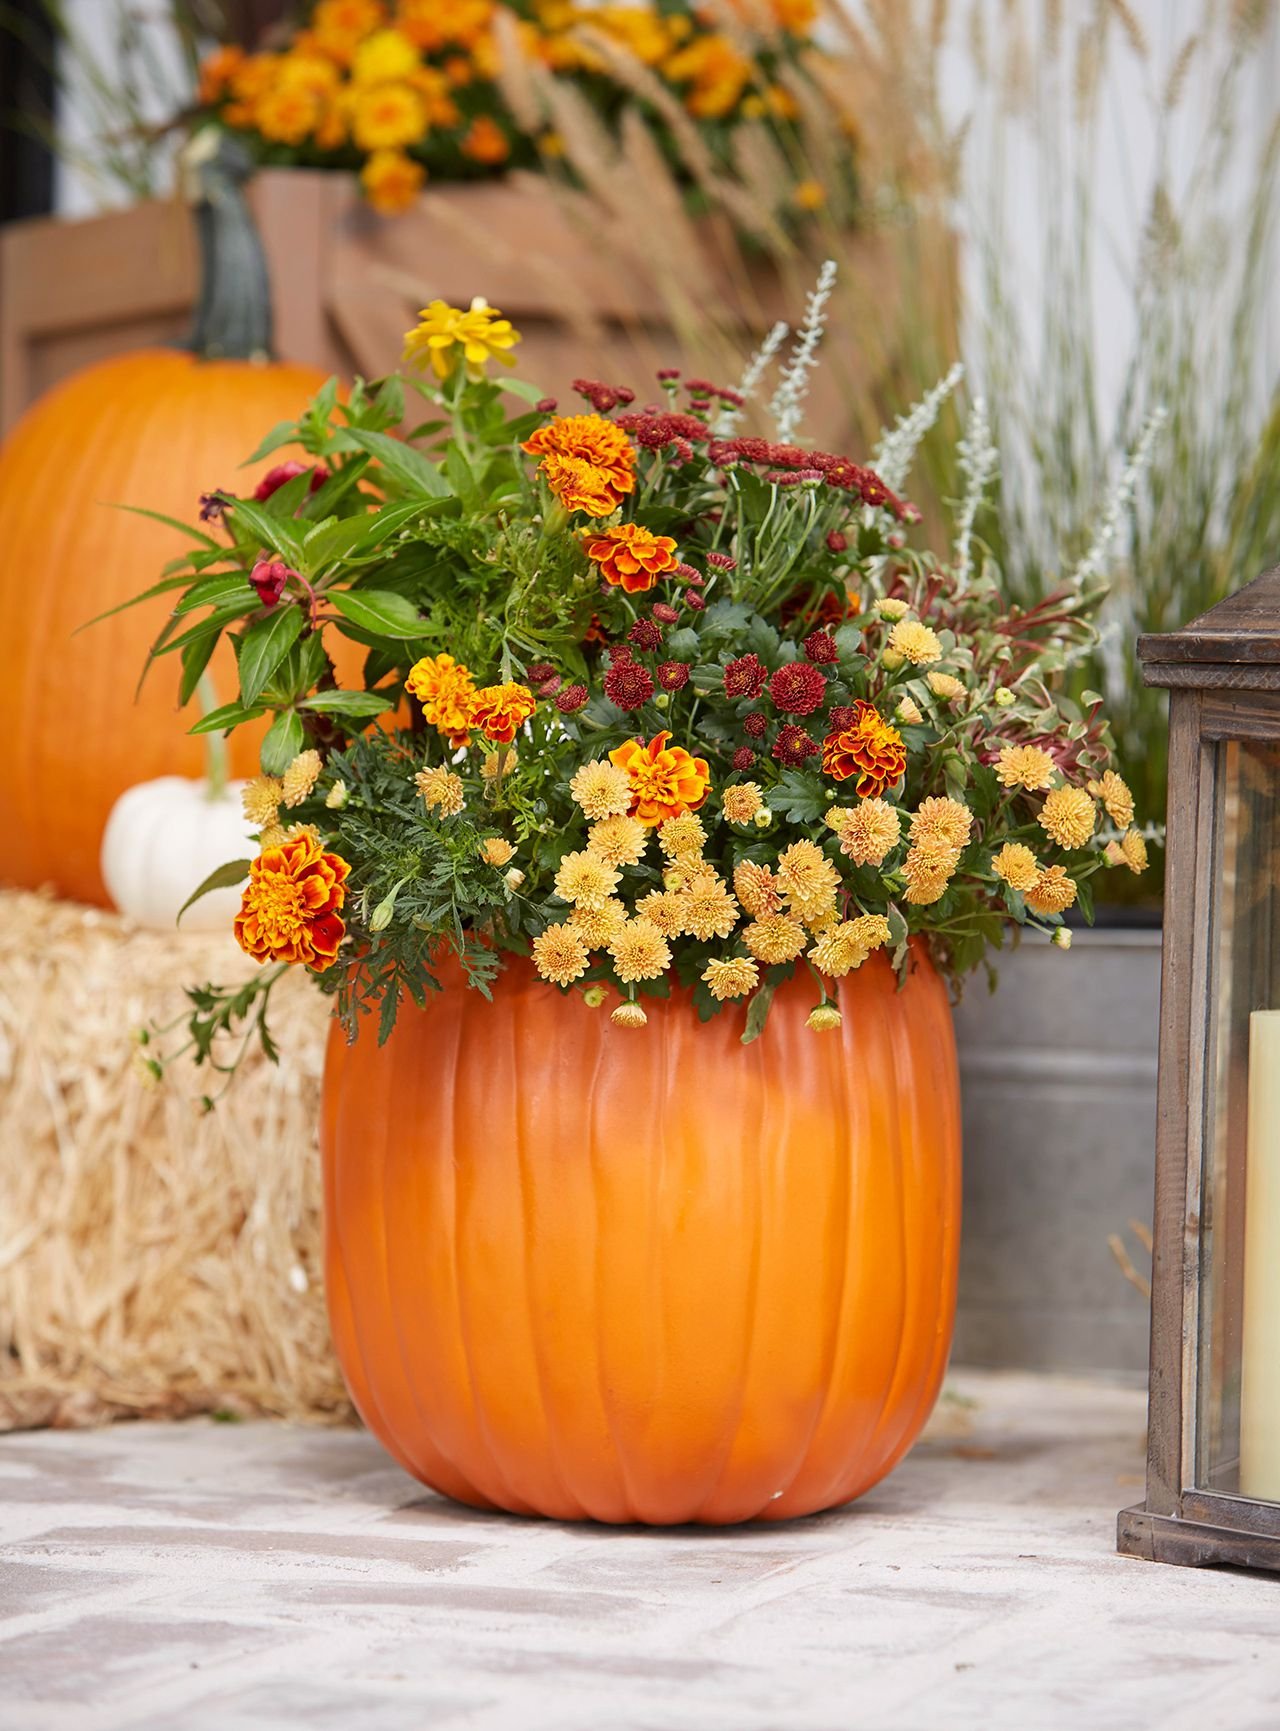 How to Make a Pumpkin Planter to Show Off Your Fall Flowers